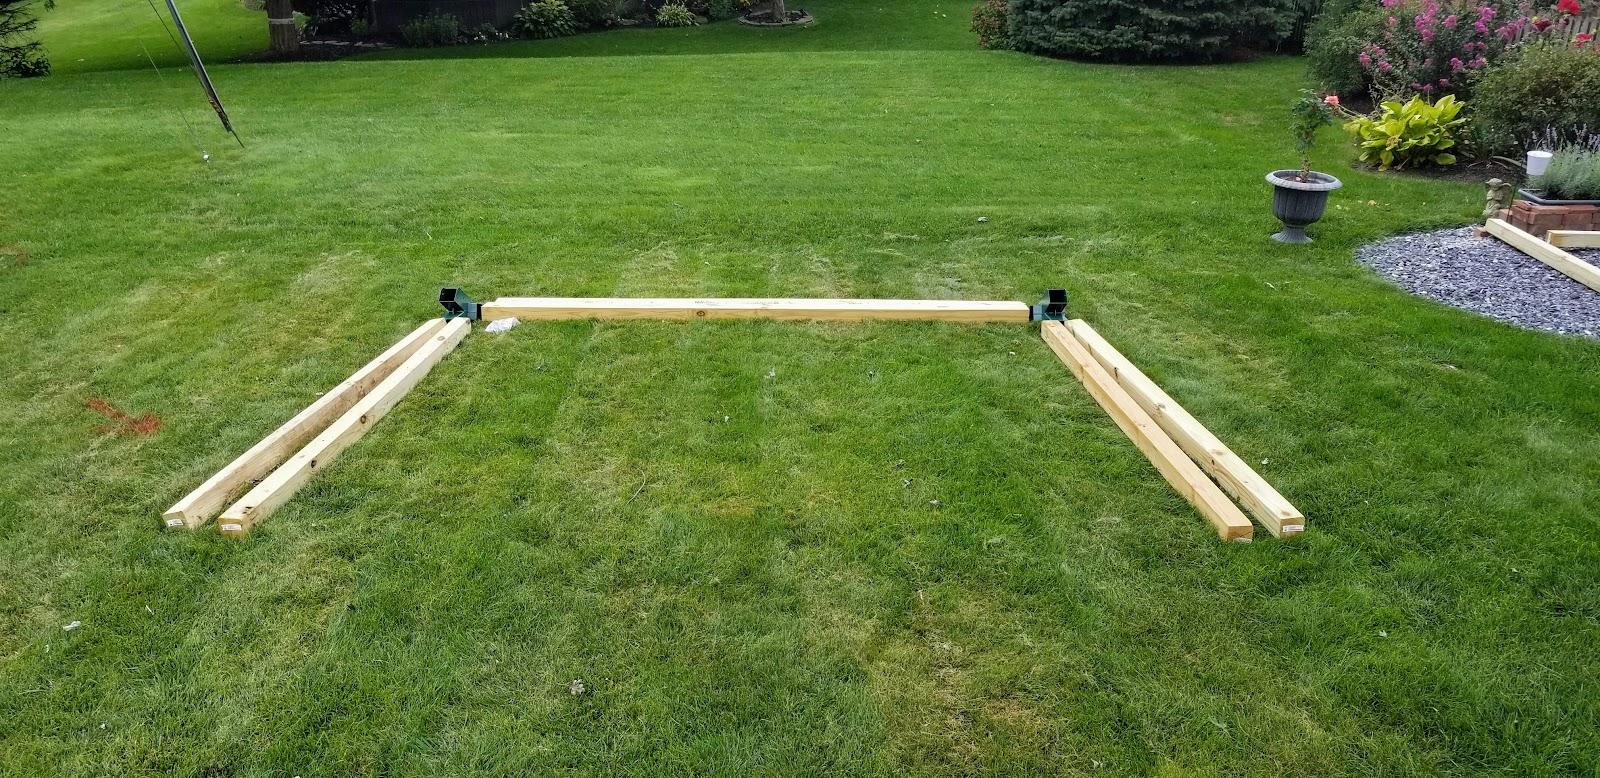 Avoid the high price tag of pre-assembled swing sets, and learn how to build a backyard swing set for cheap with this idea for kids!